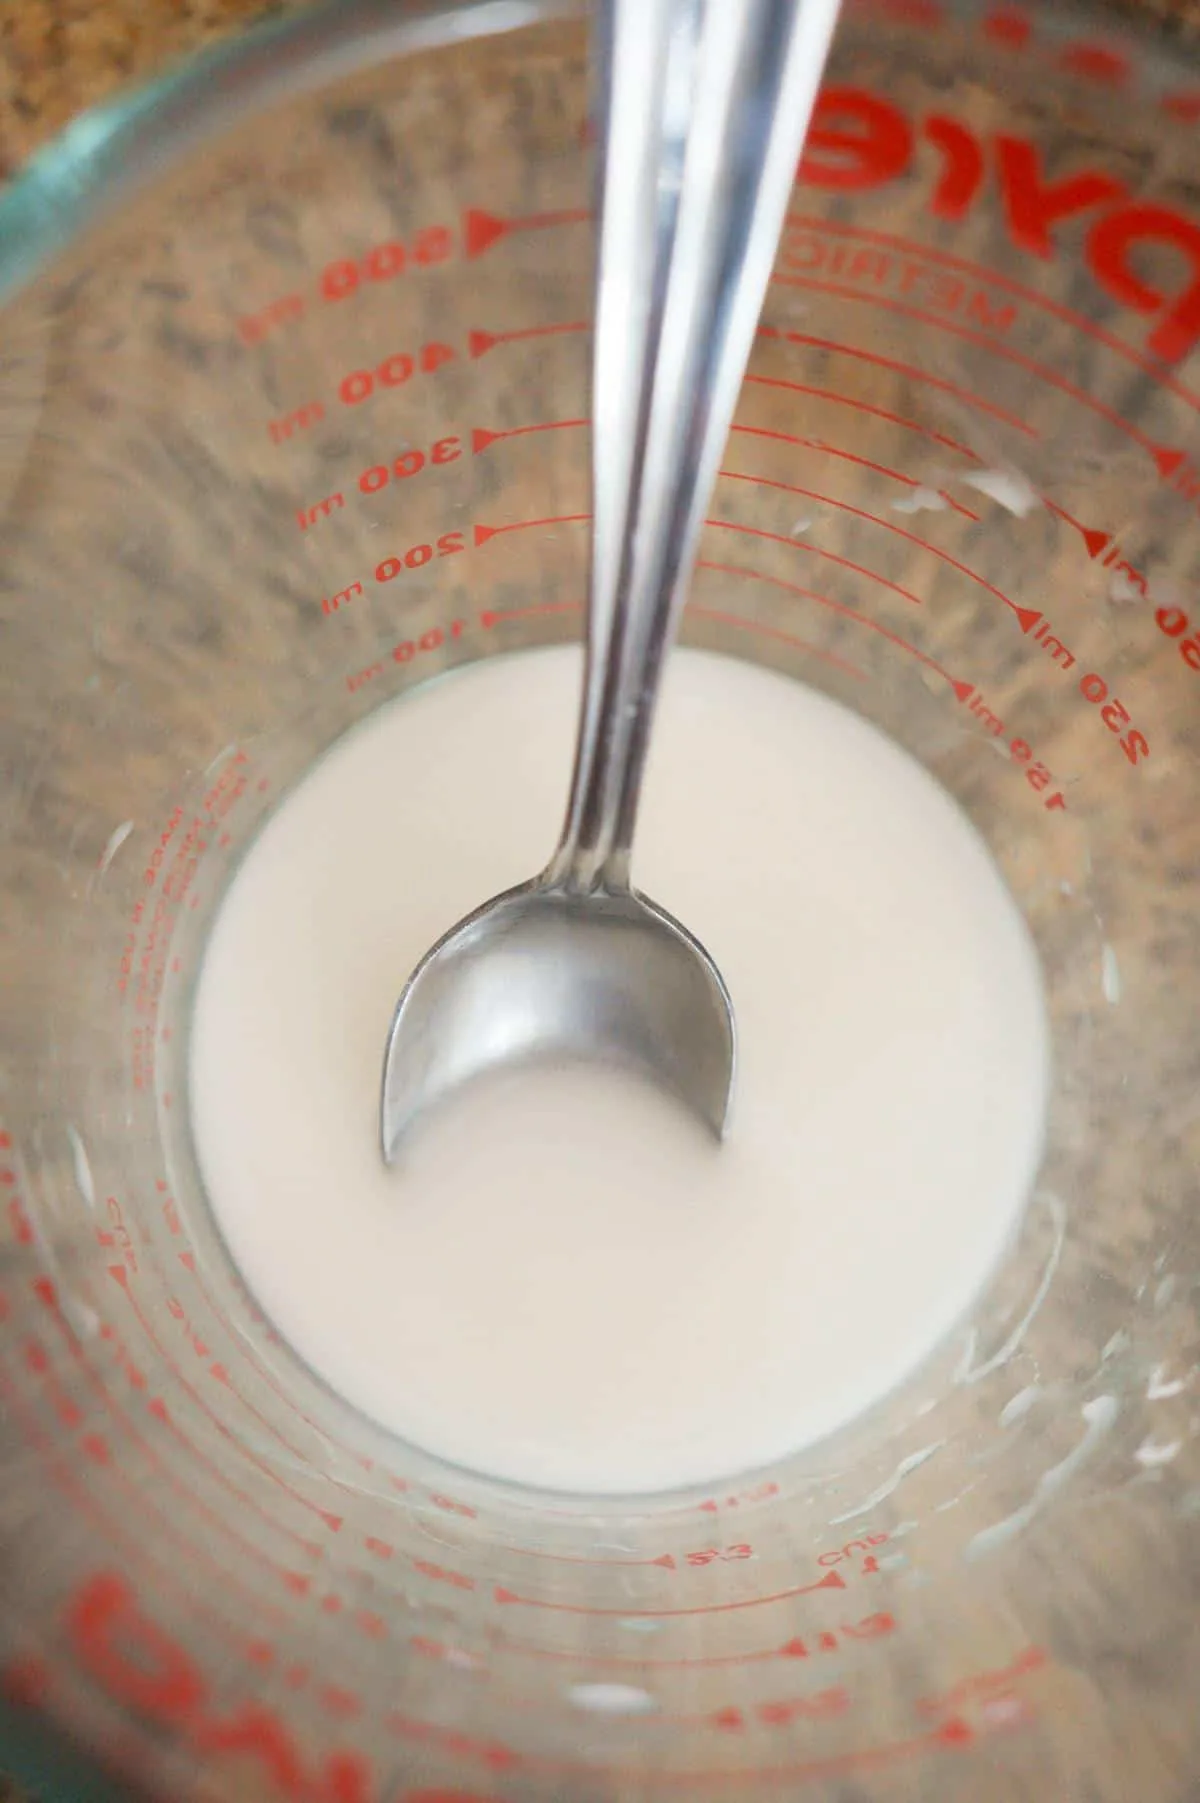 water and cornstarch mixture in a glass measuring cup